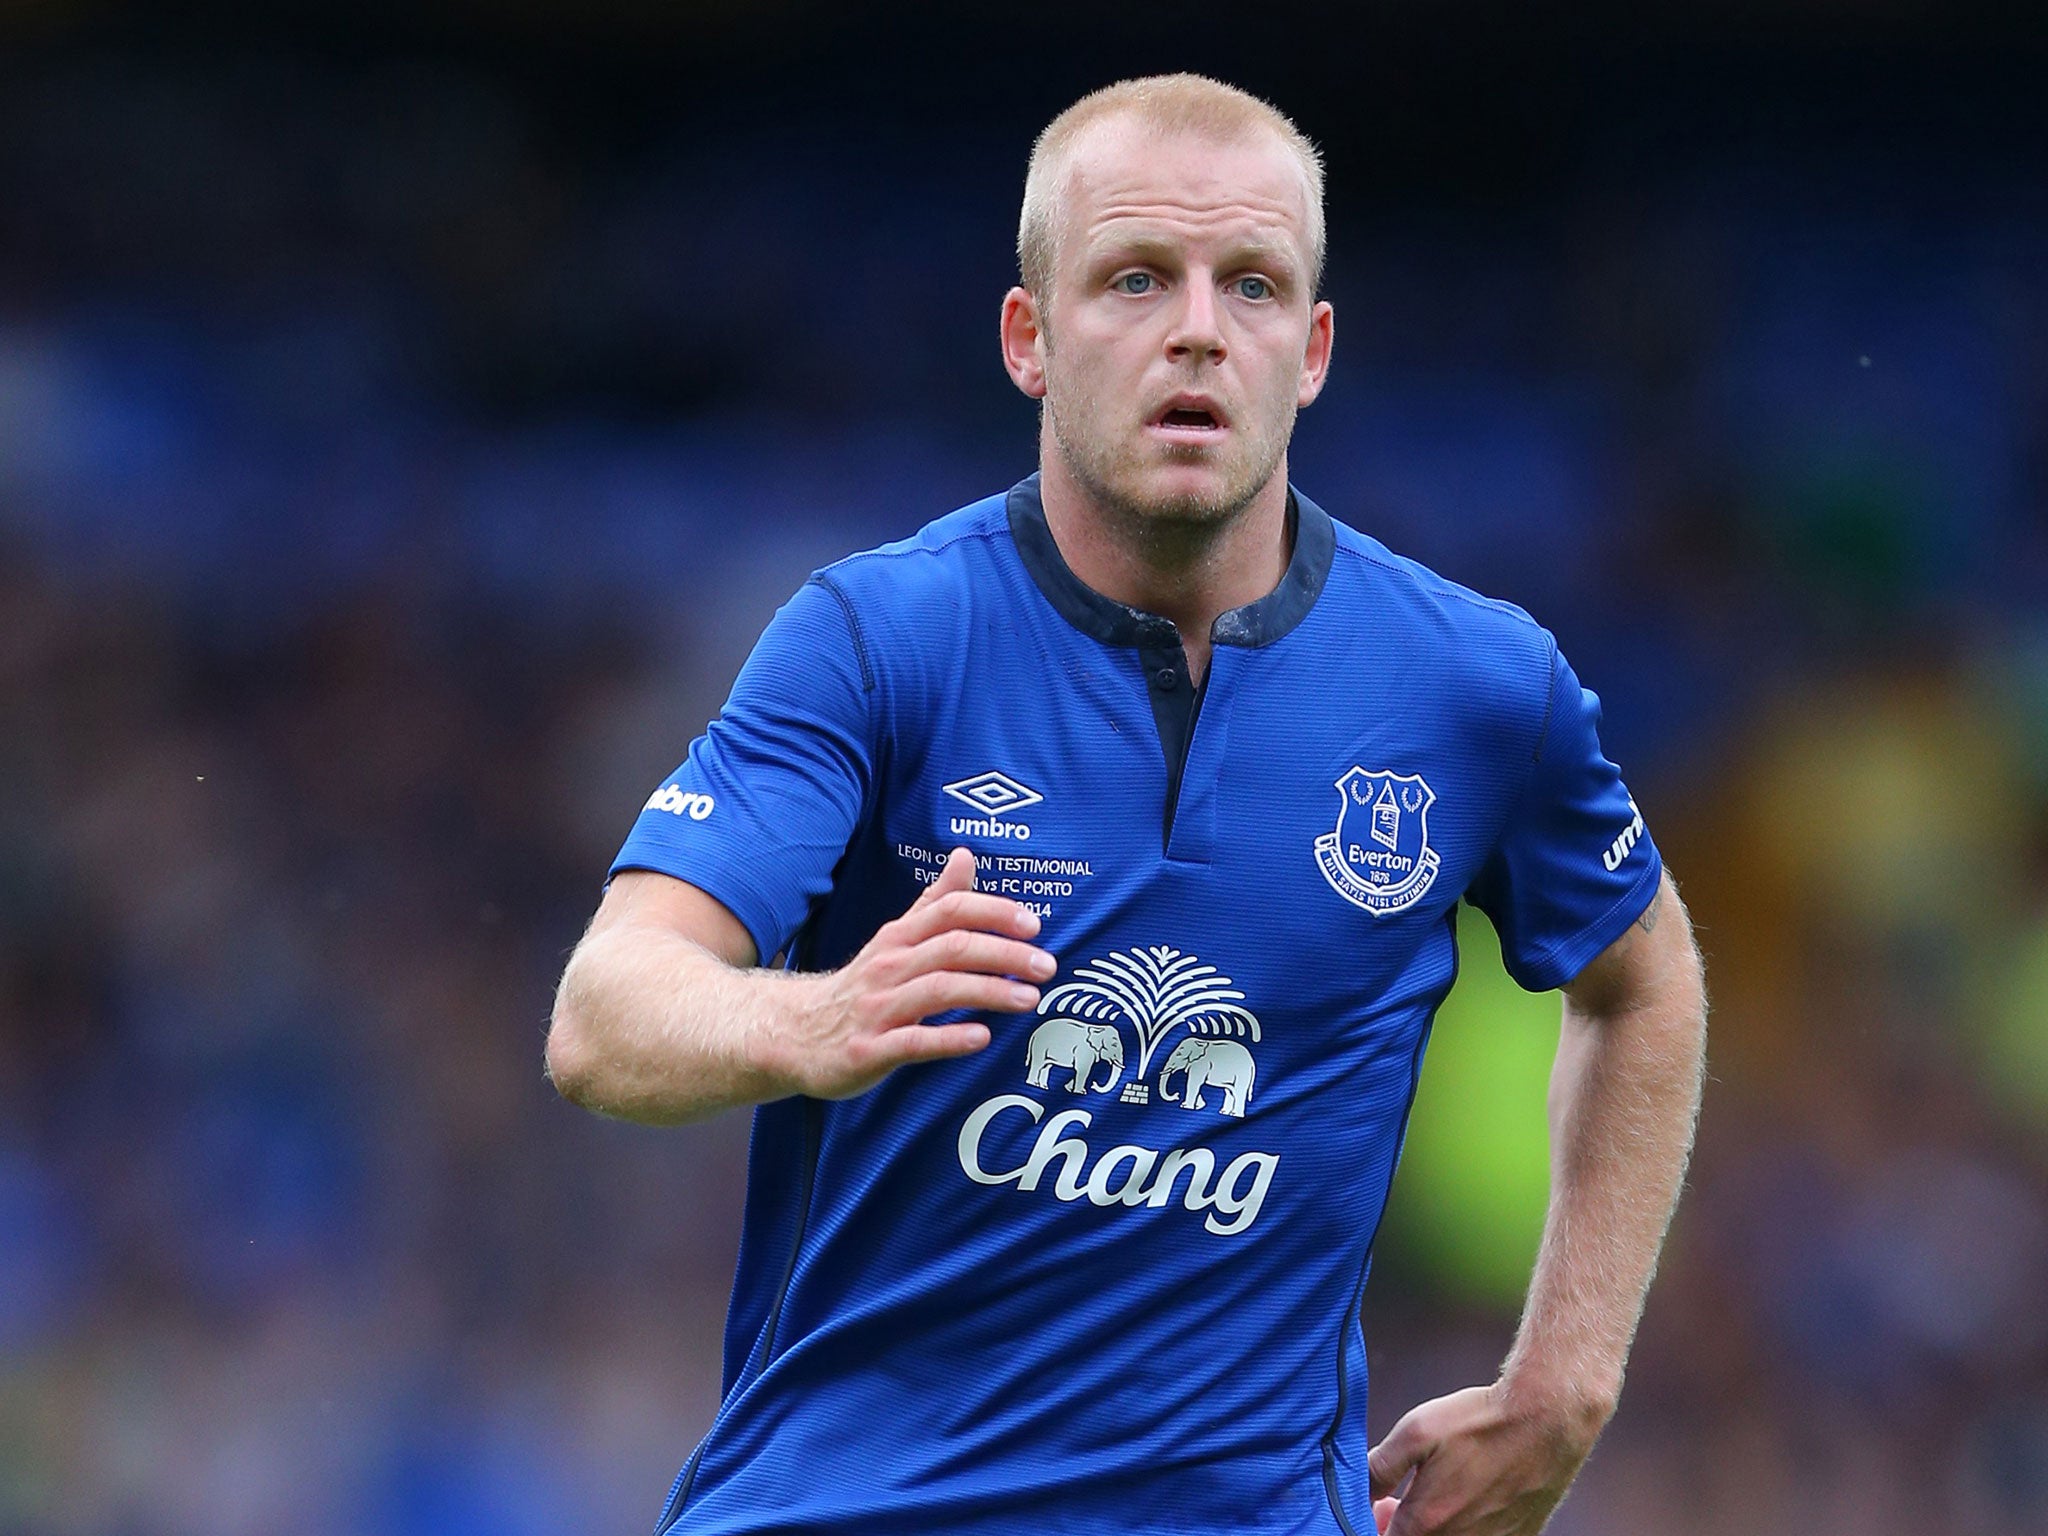 Steven Naismith in action for Everton in the friendly against Porto on Sunday